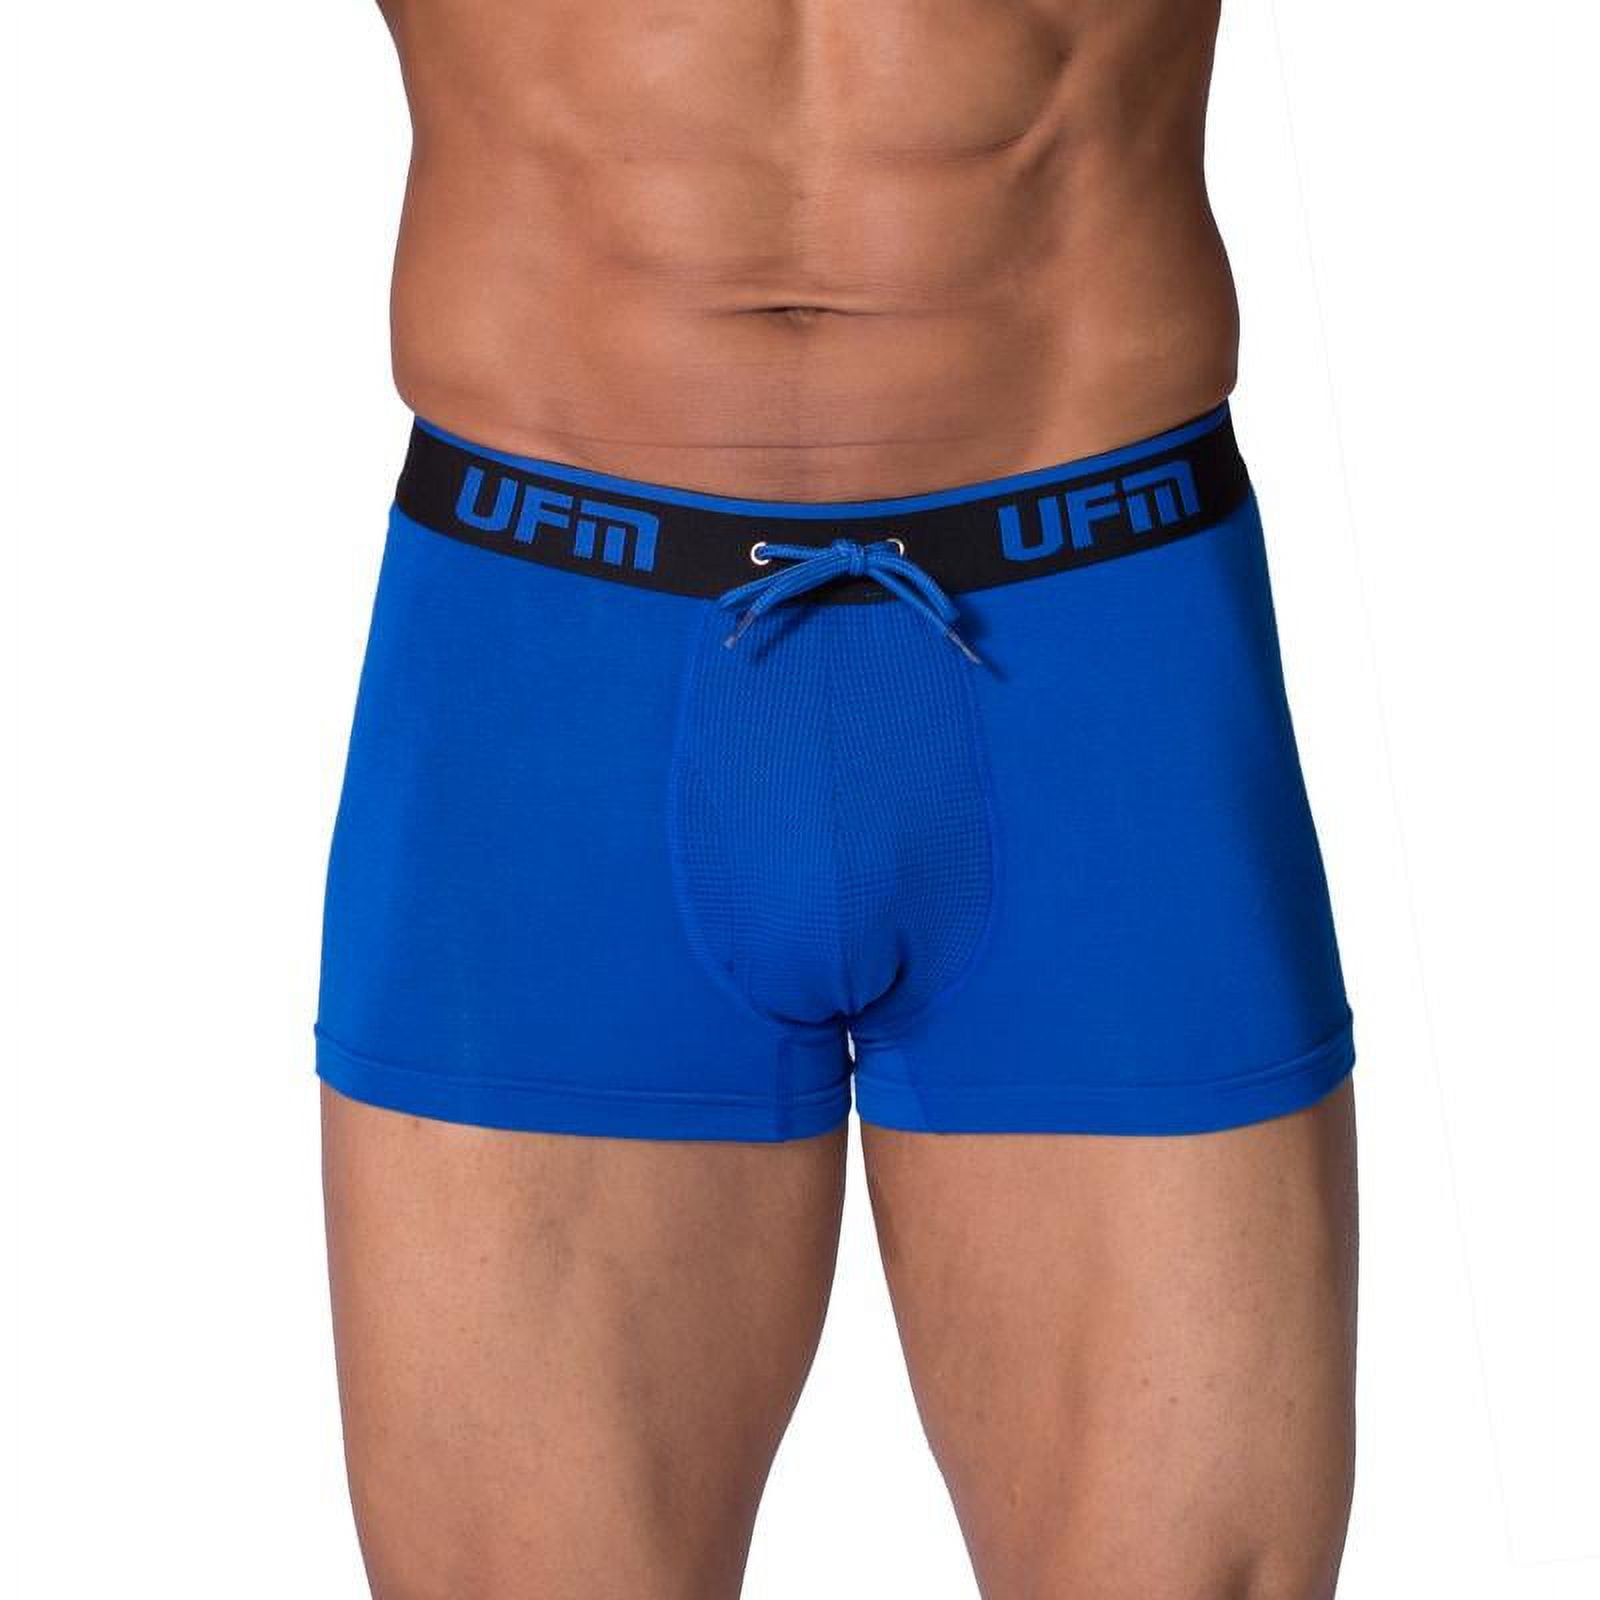 UFM Men's Polyester Trunk w/Patented Adjustable Support Pouch